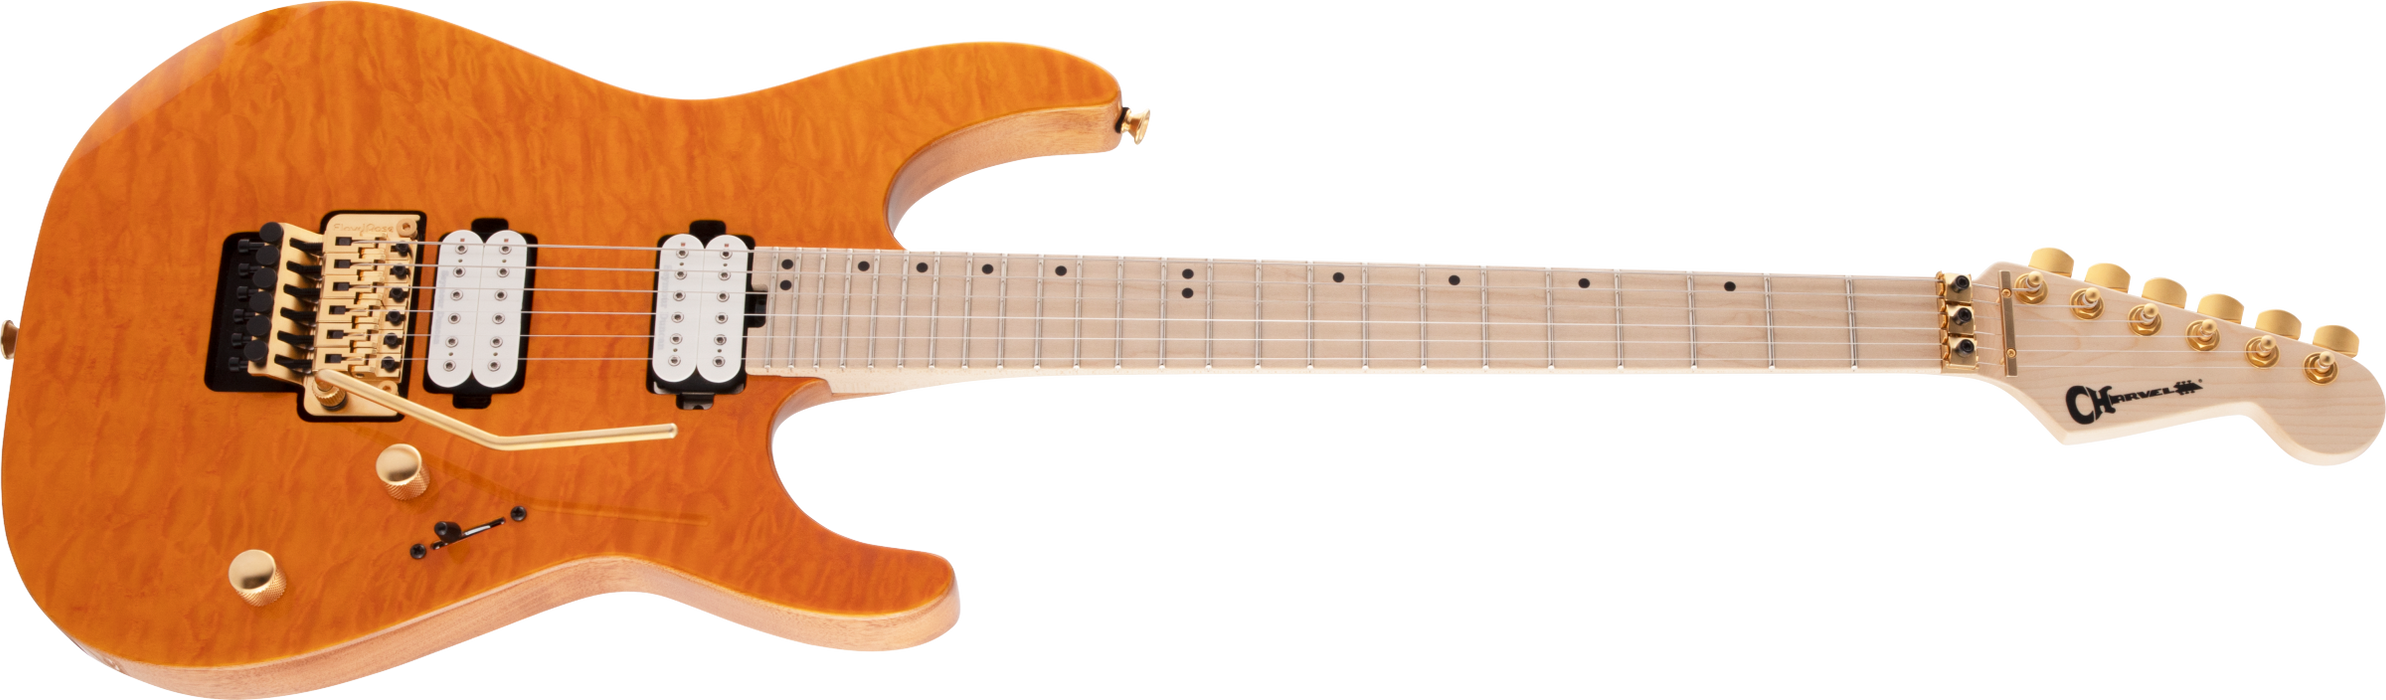 Charvel Pro-Mod DK24 FR Mahogany with Quilt Maple, Maple Fingerboard, Dark Amber